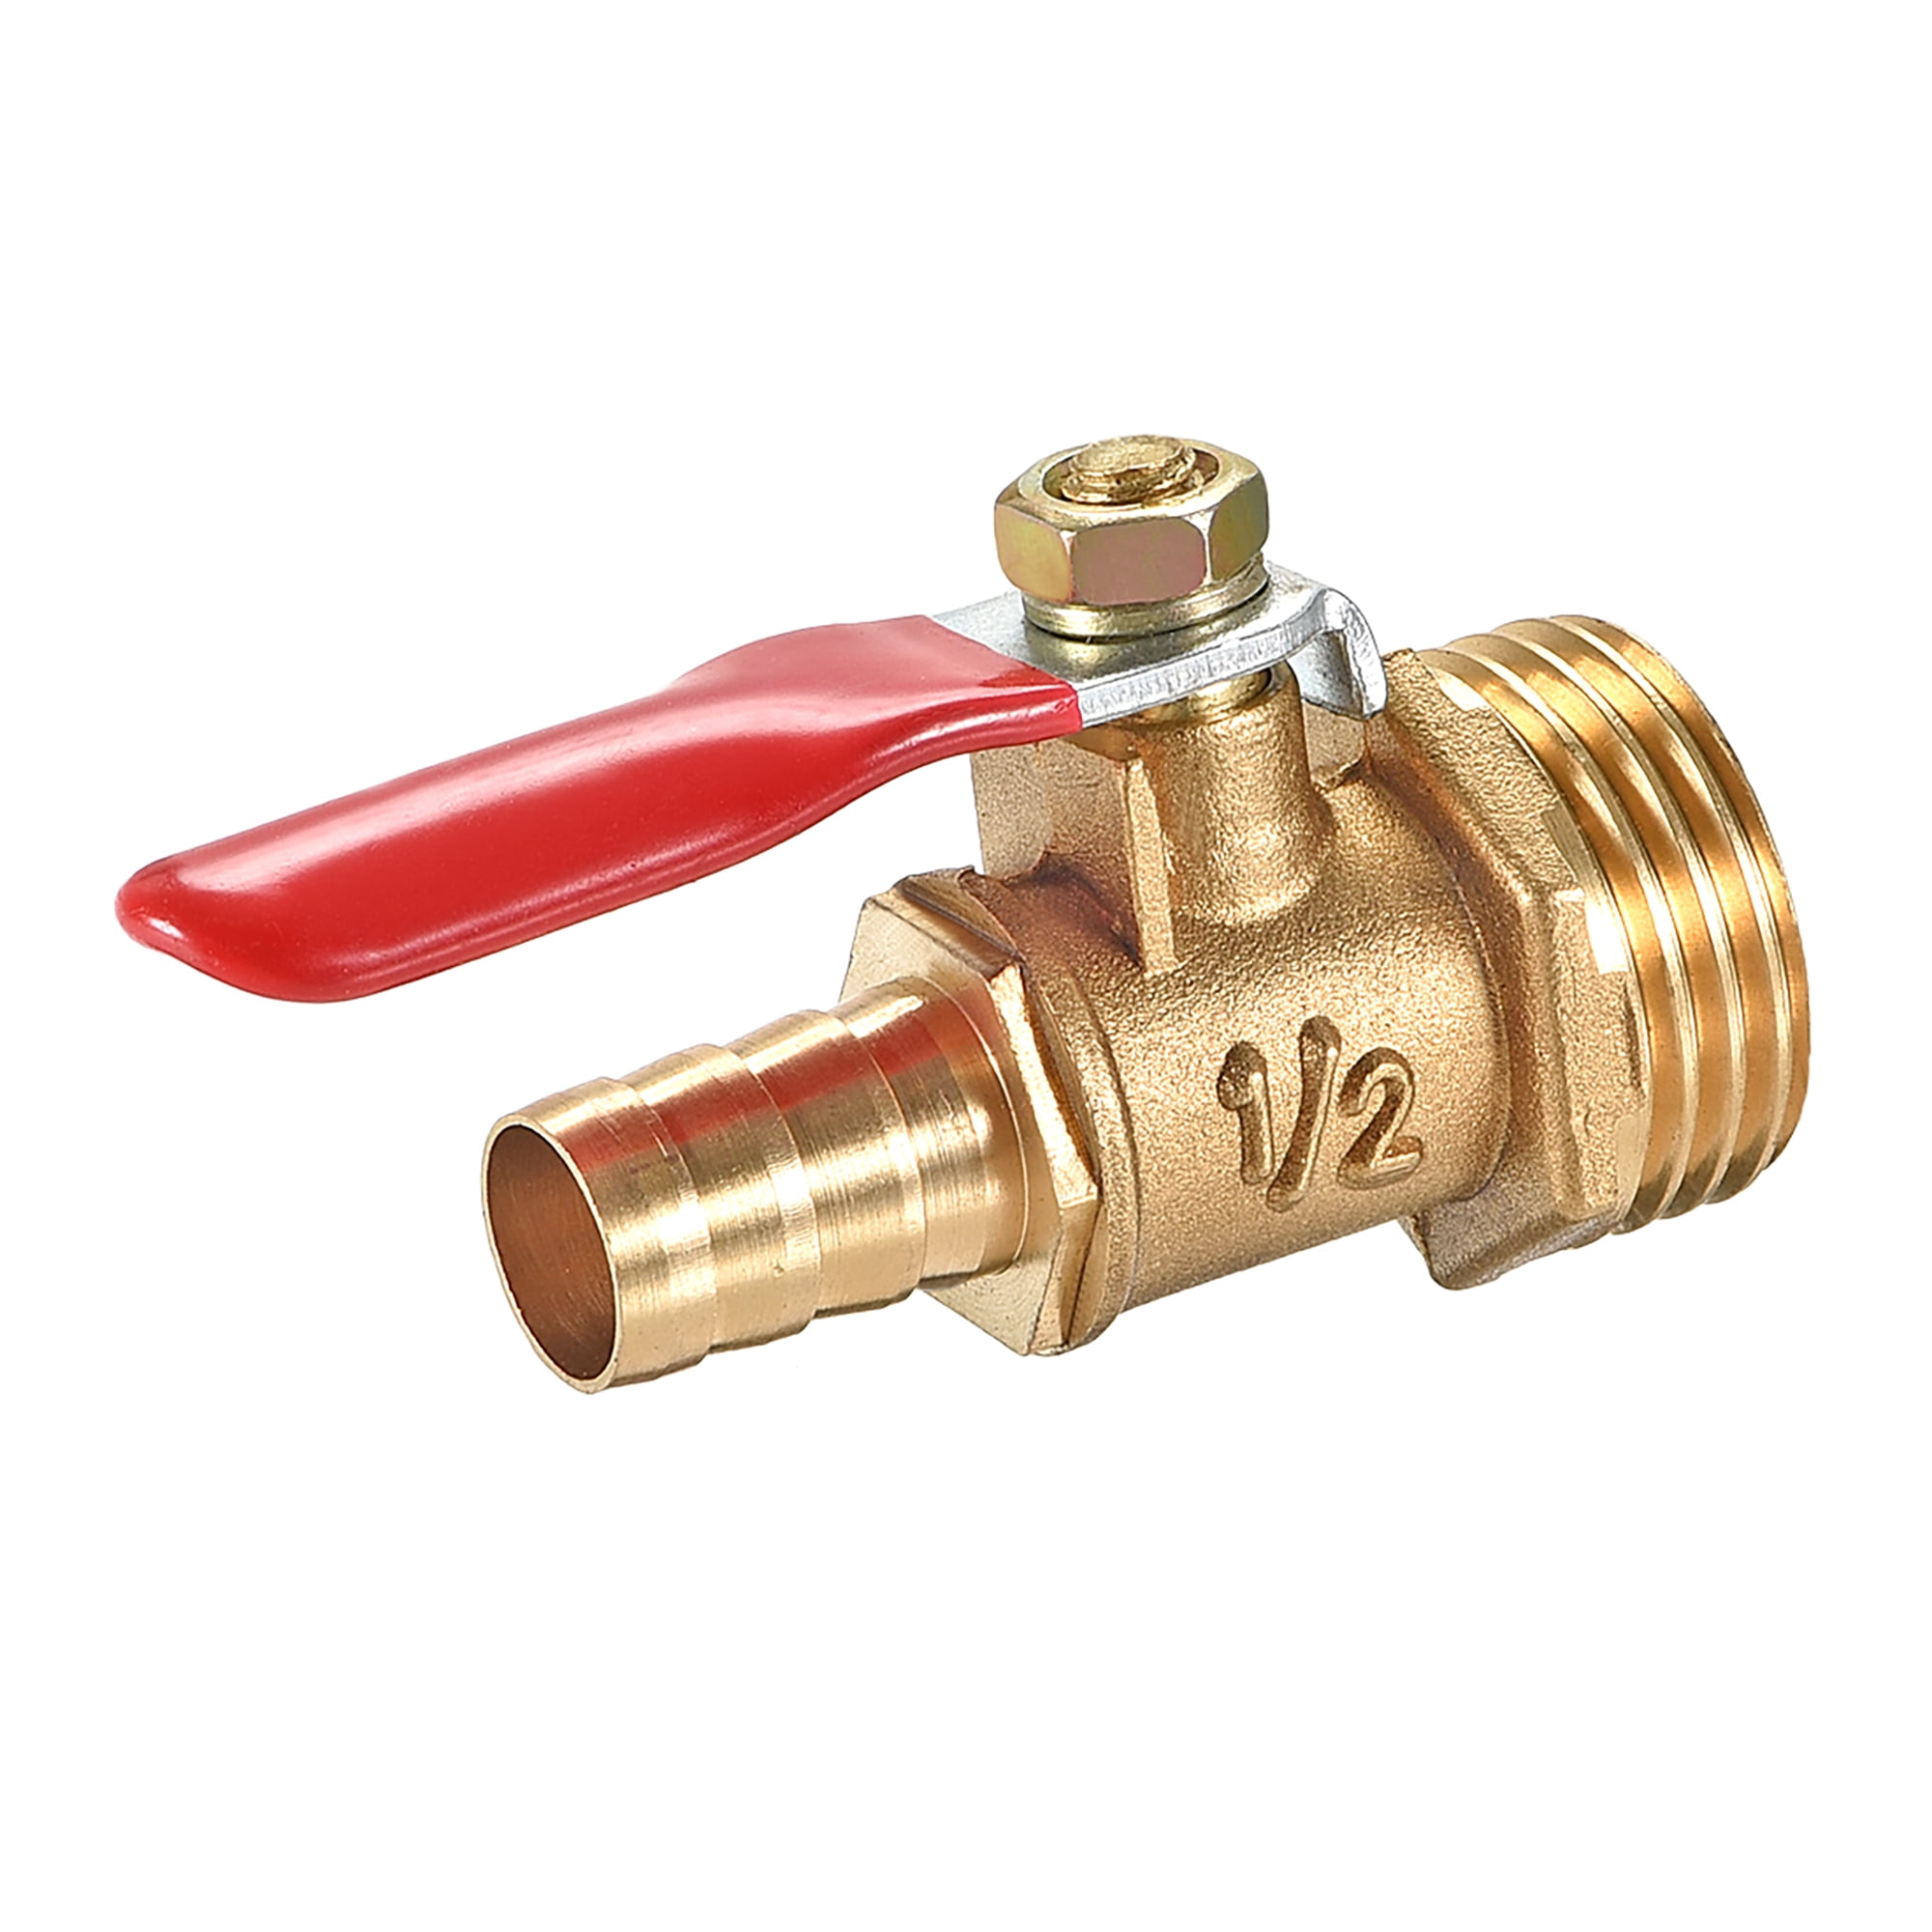 for Valve Switch air Pump Outlet Male to Female Thread Ball Valve 5 pcs G1 / 2 Thick Brass Ball Valve air Compressor